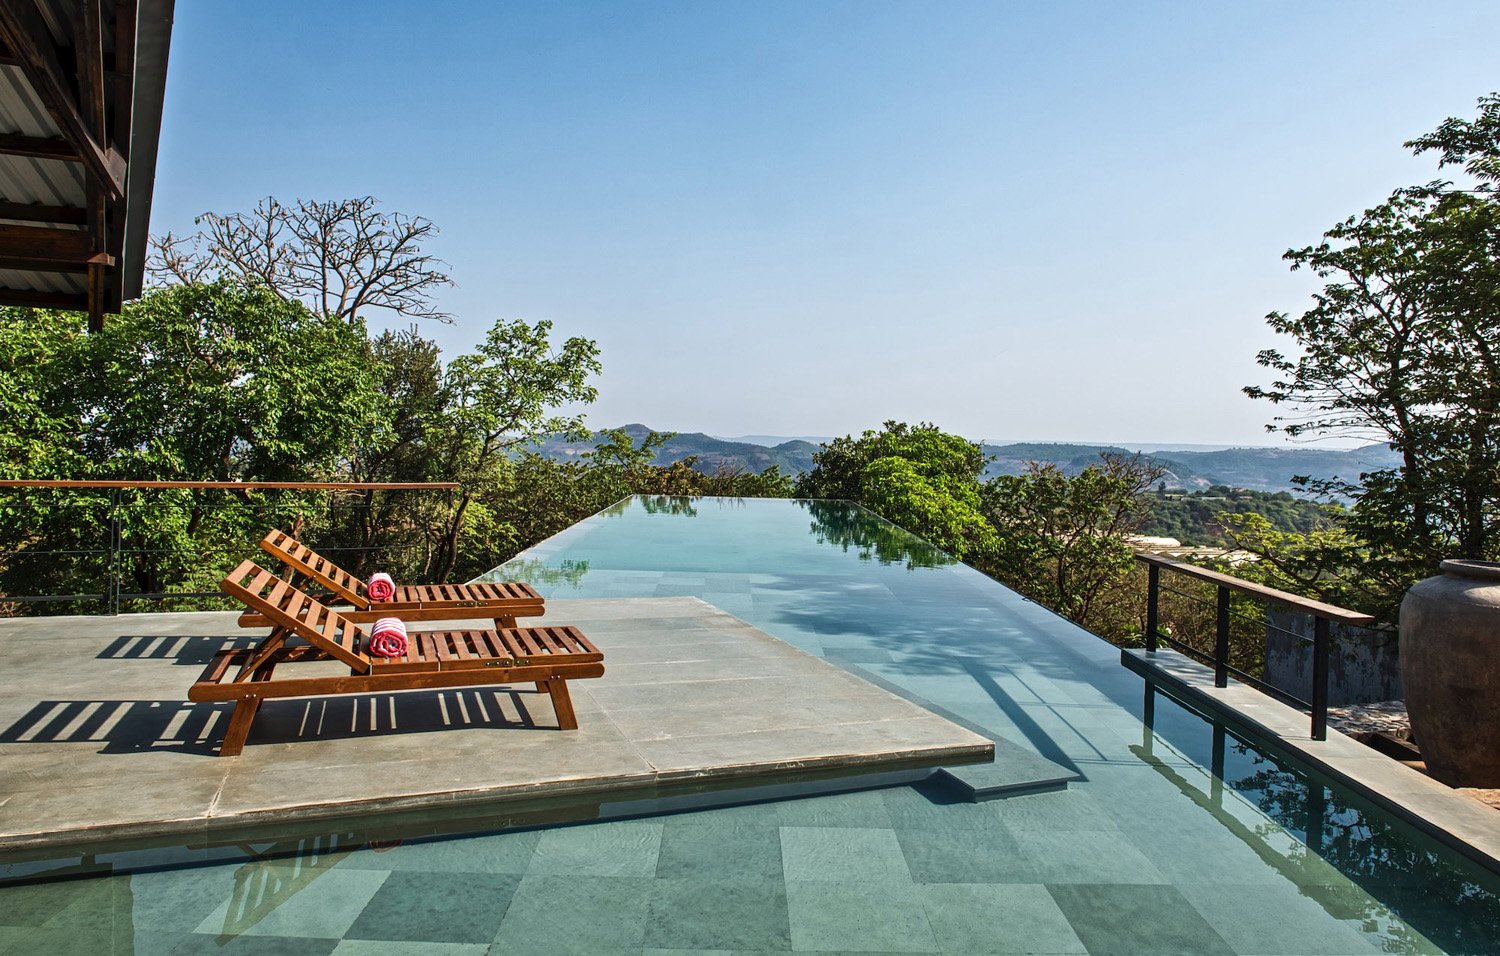 The elevated pool (sleeping spaces below it) extends into the  Forest and connects to the hills beyond | Bharath Ramamrutham